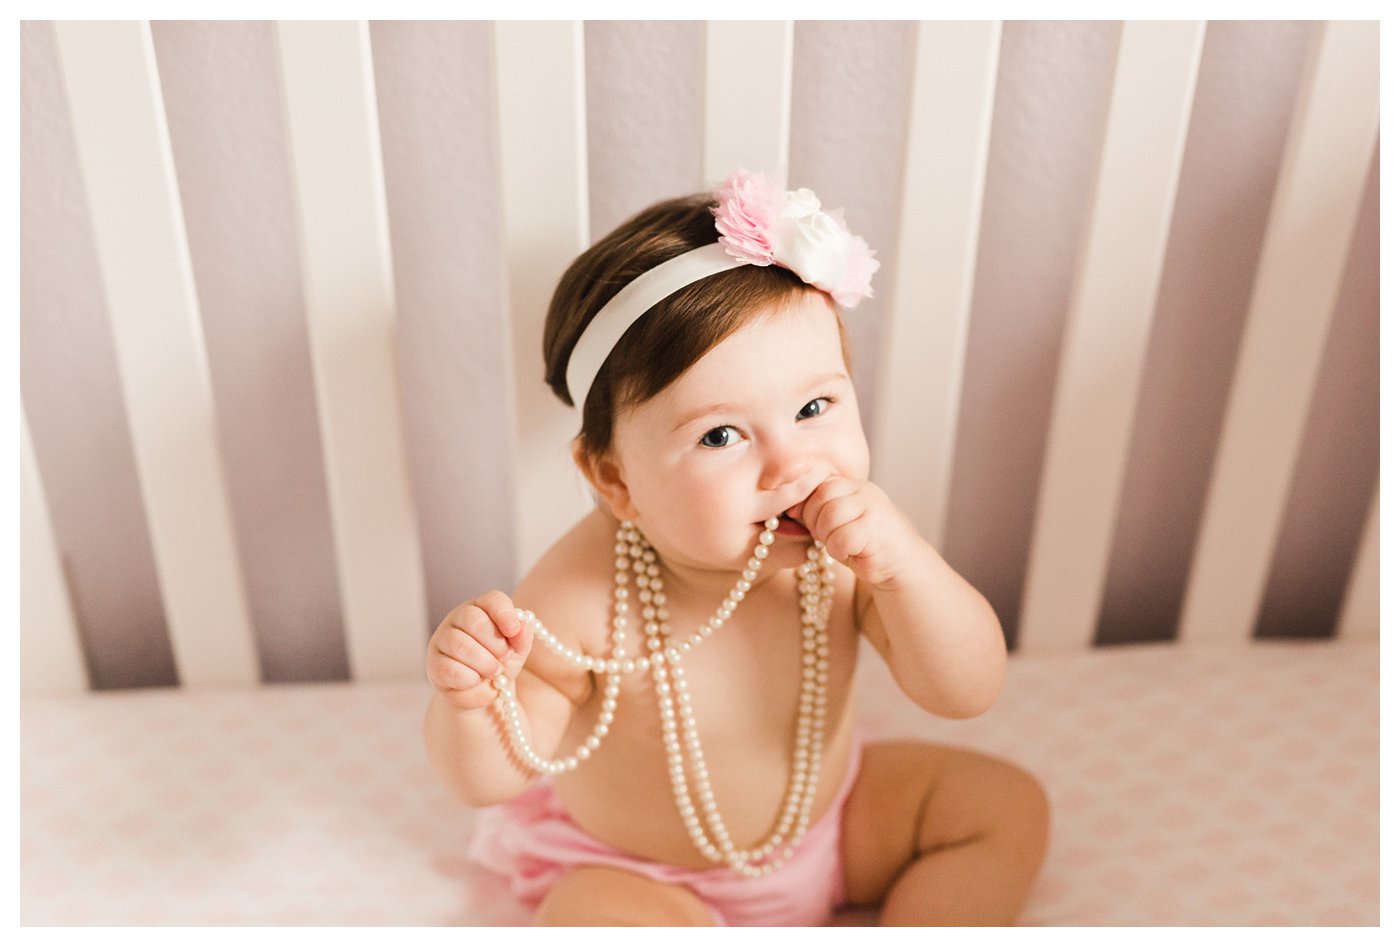 Pink and Pearls Photo Session for 1 Year Old